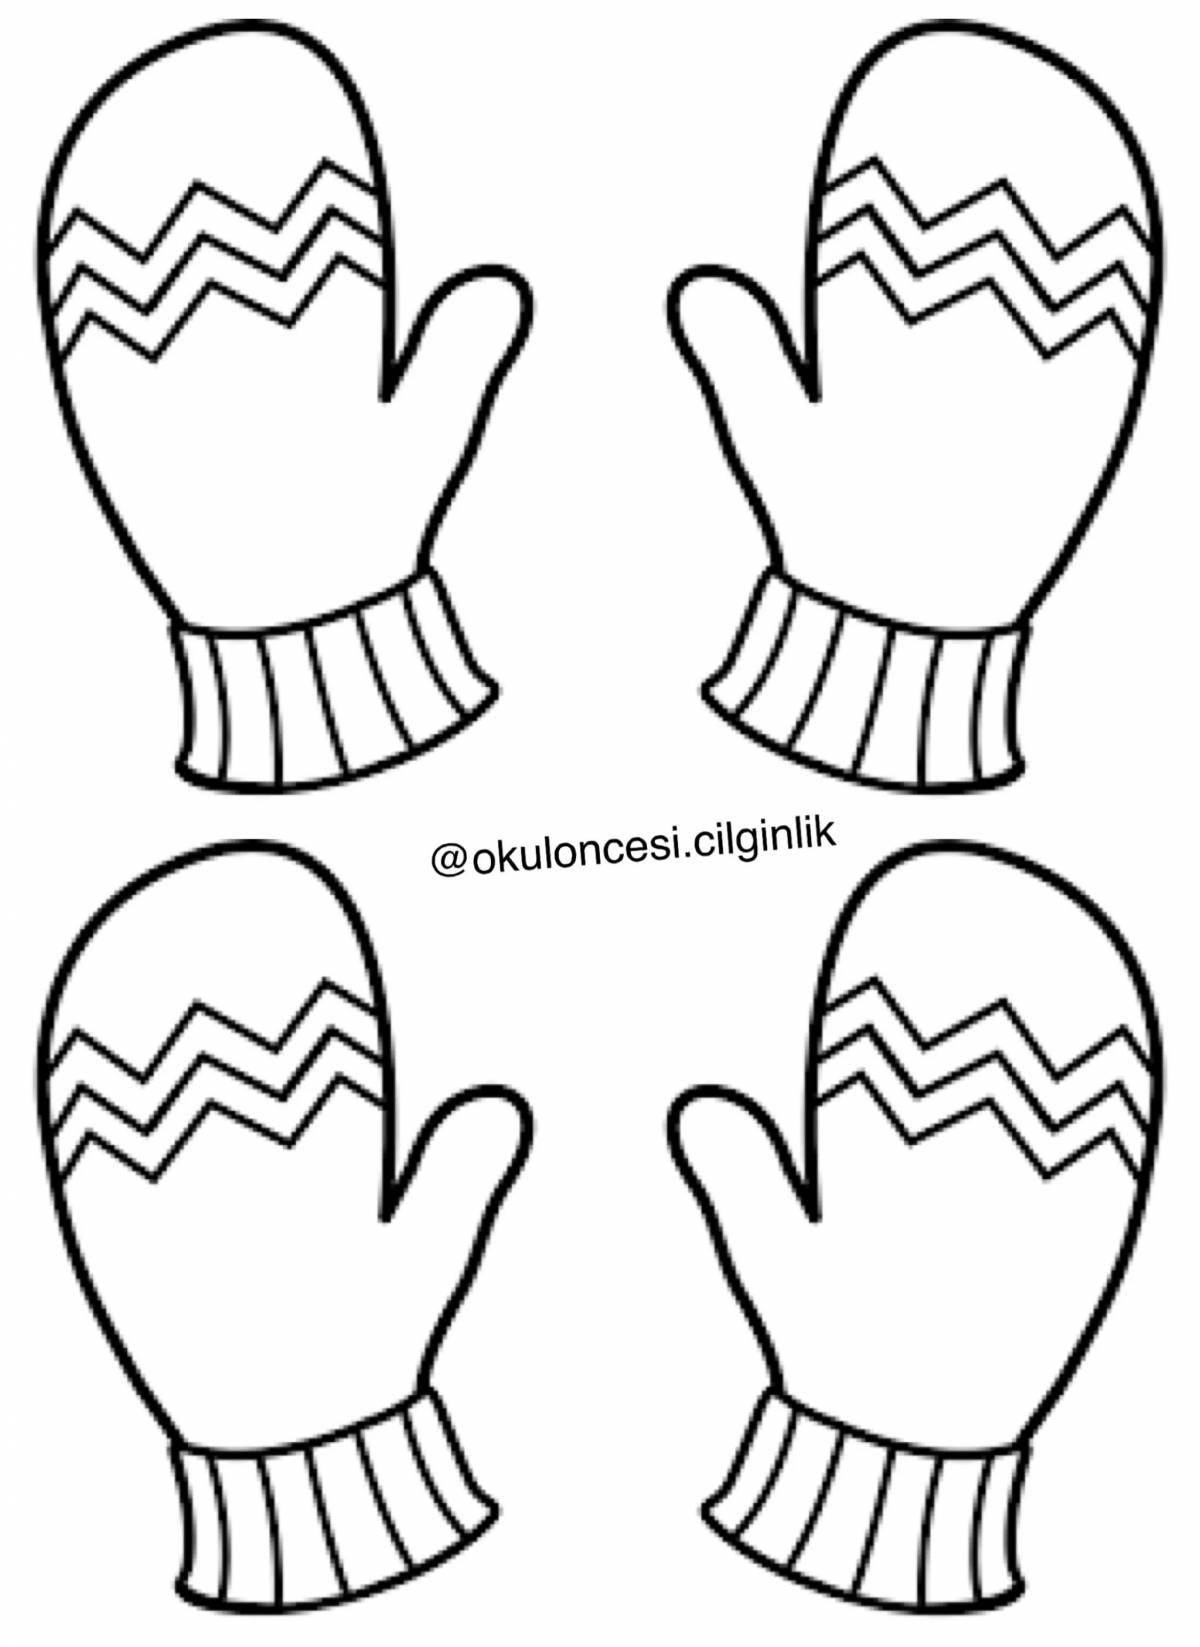 Fairy mittens and hat coloring book for kids